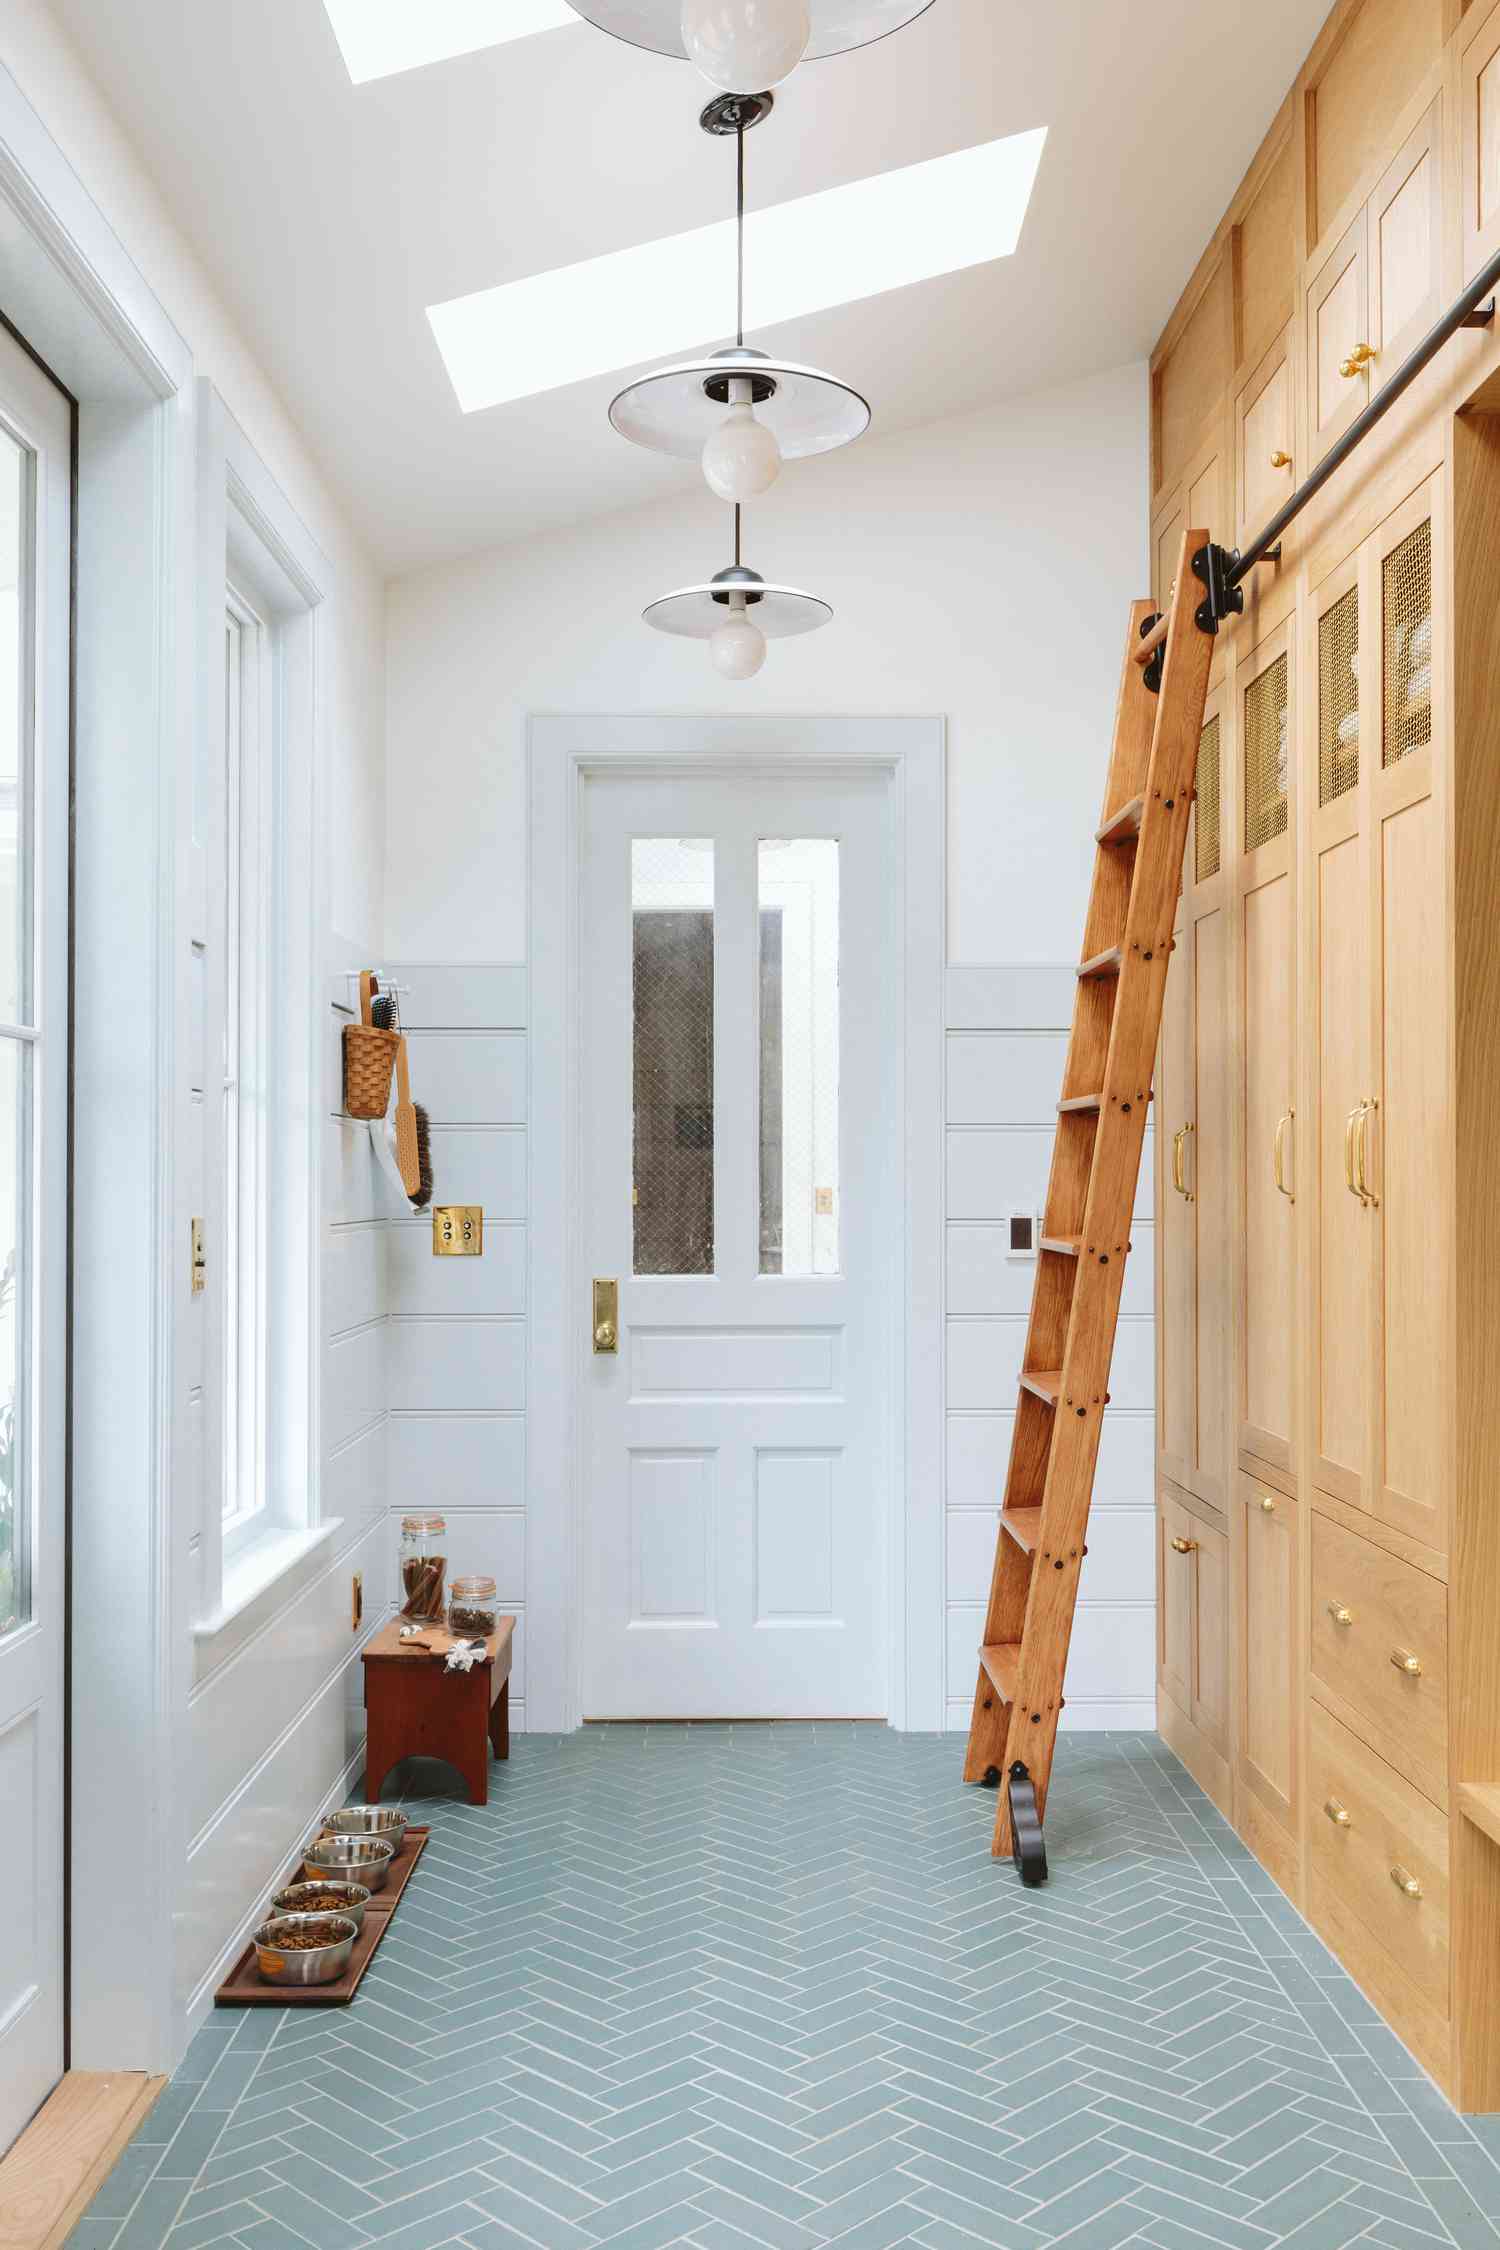 Wooden rolling ladder attached to built-ins in a narrow hallway